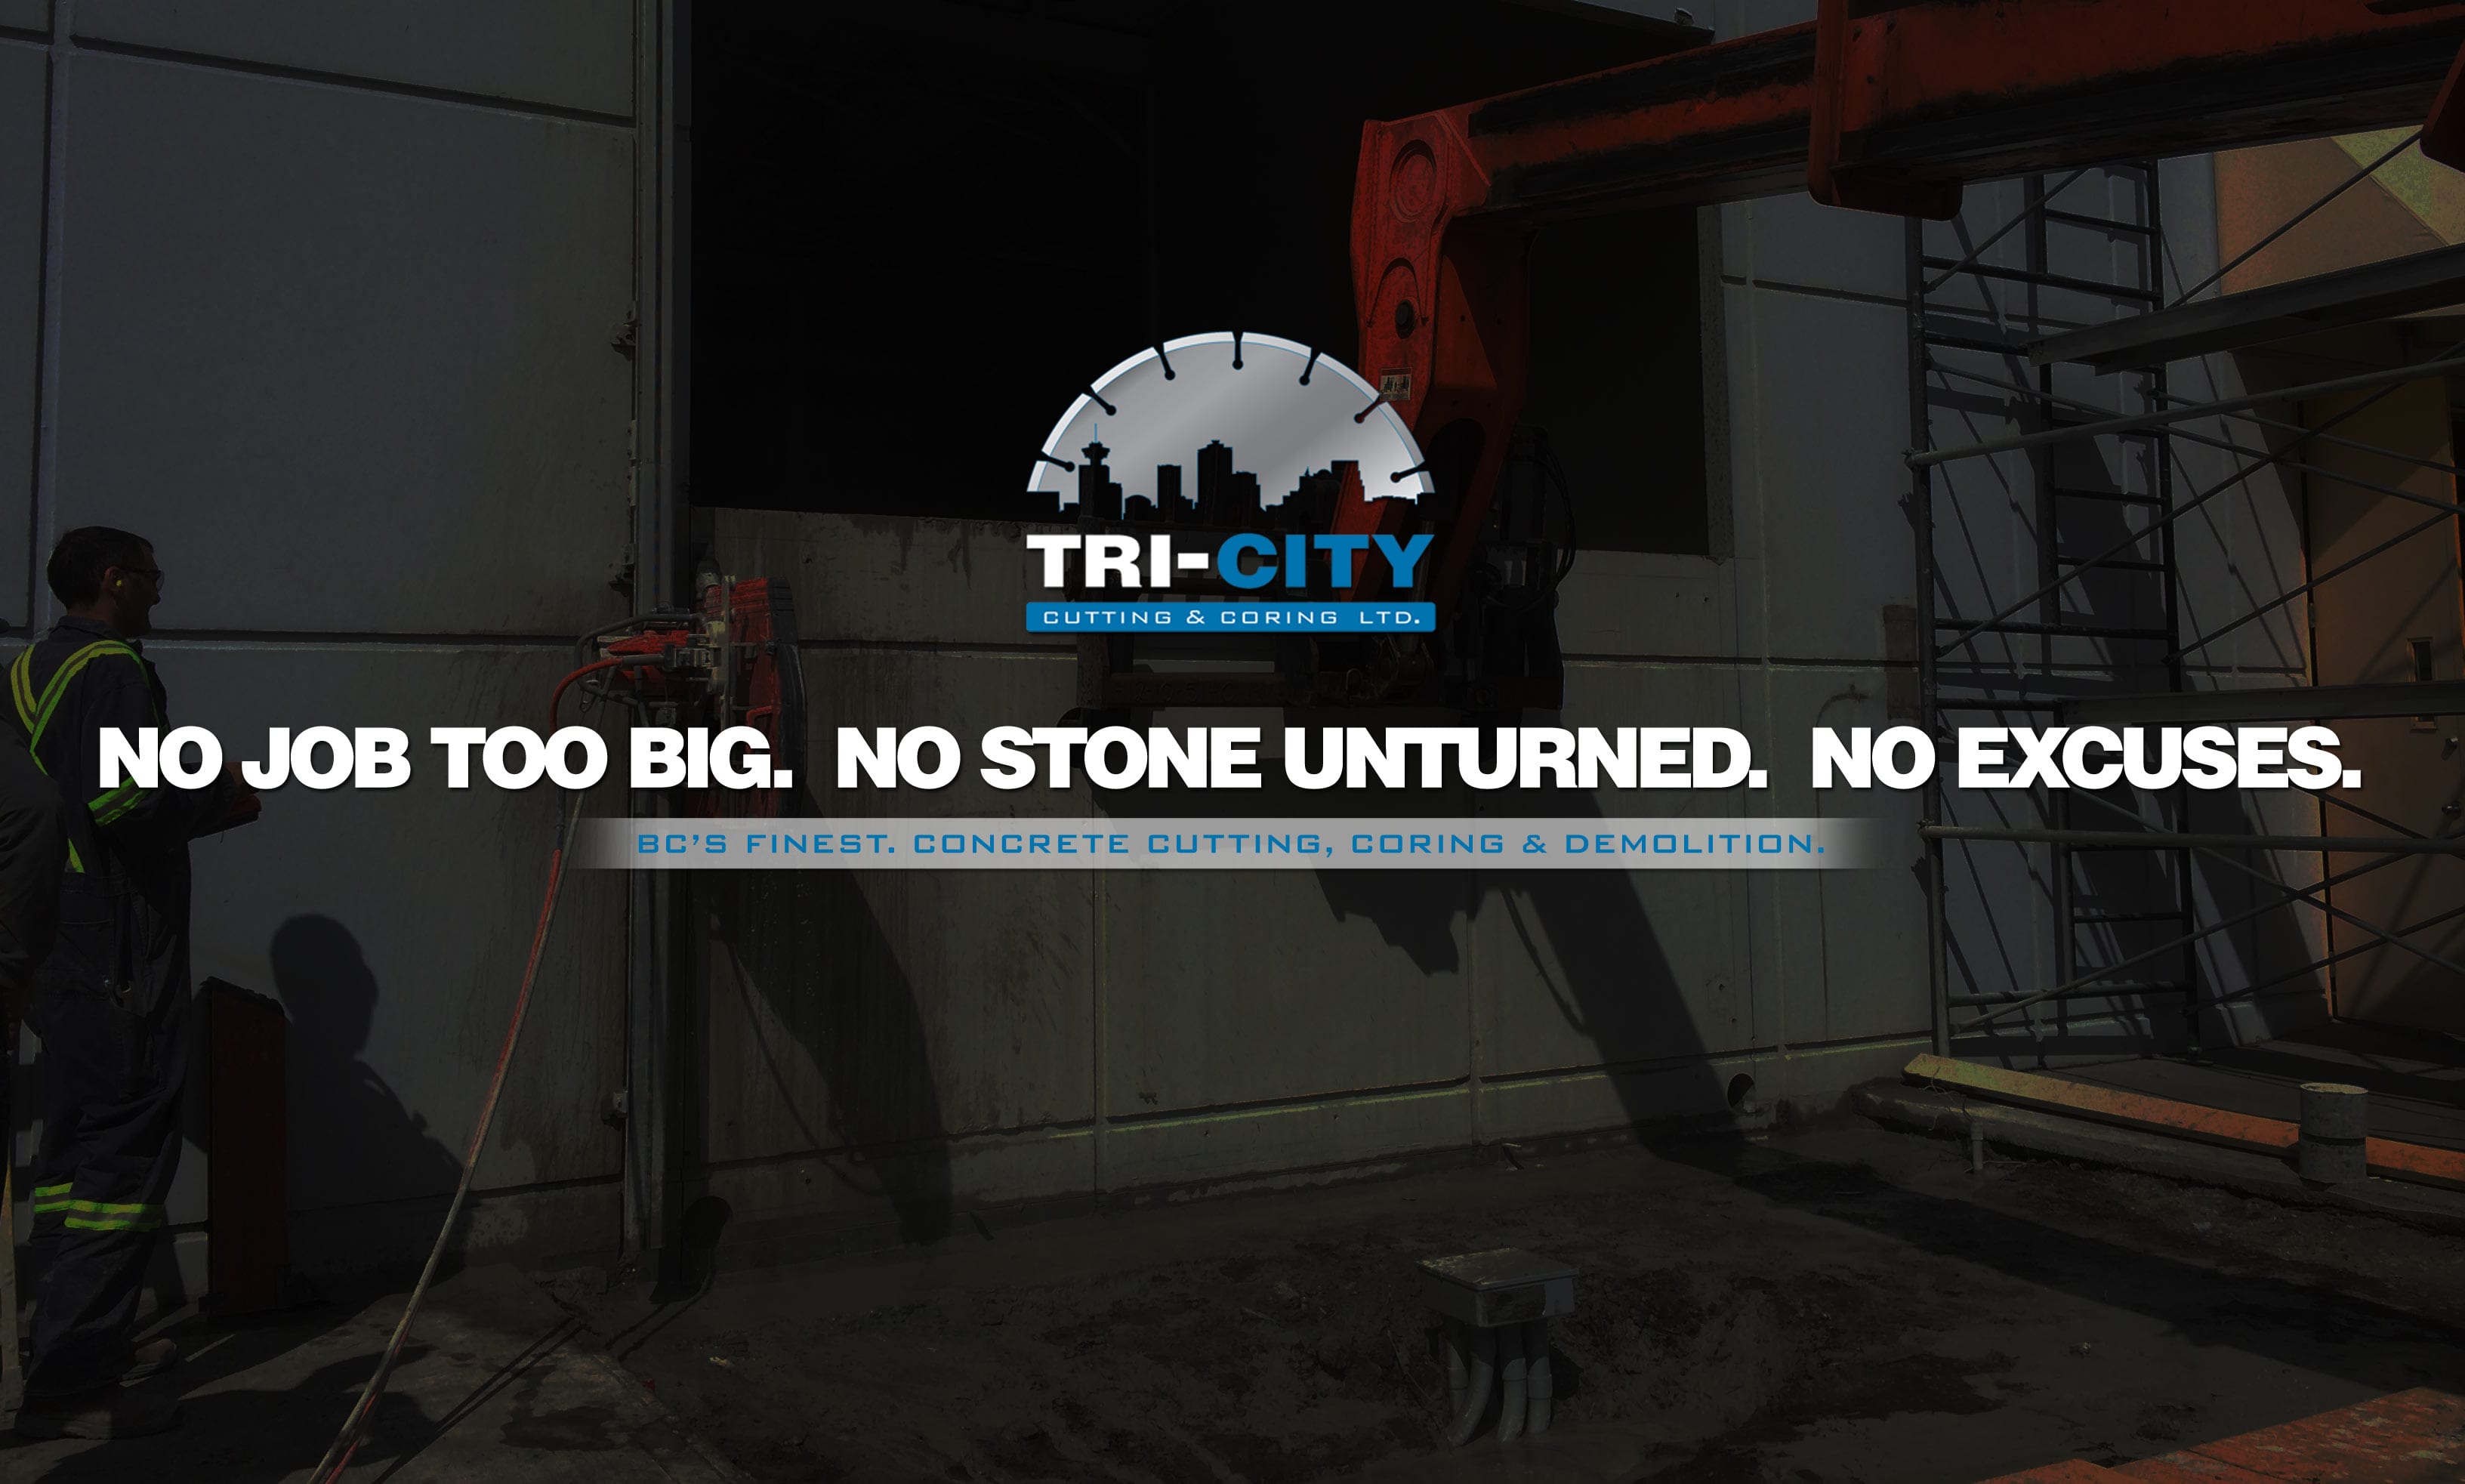 Tri-City-Concrete-Cutting-and-Coring-Vancouver